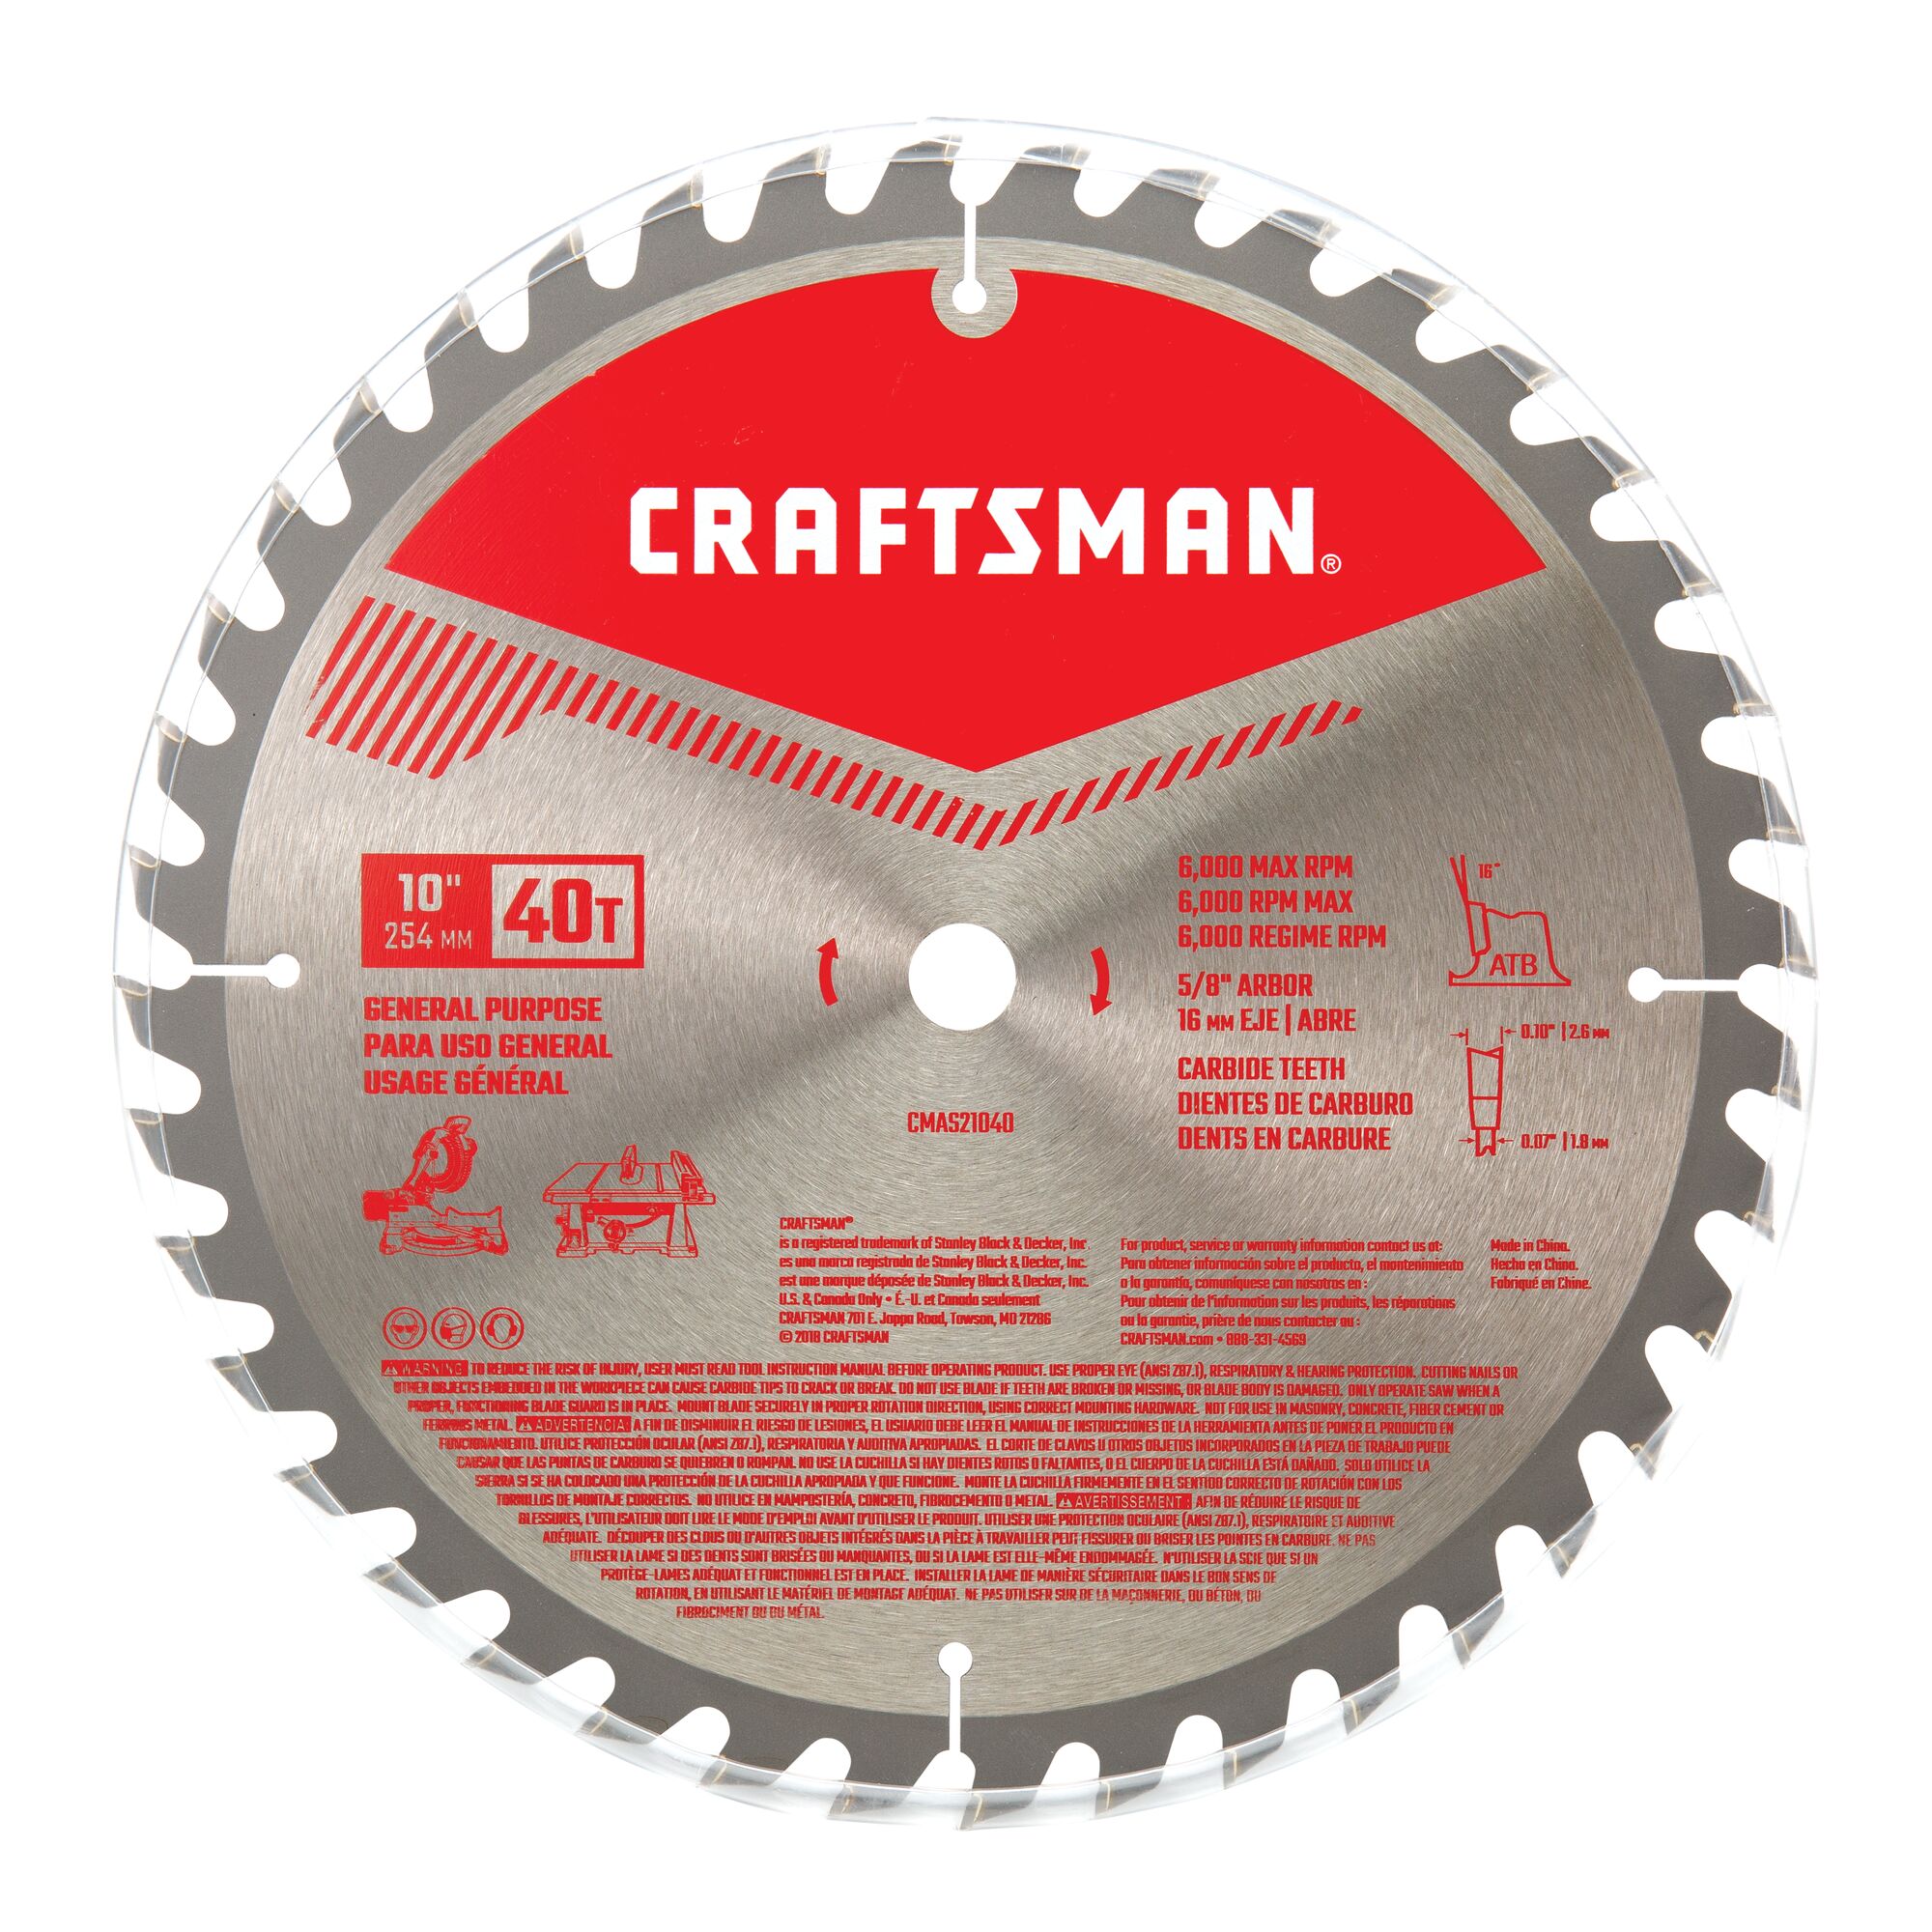 10 inch 40 tooth general purpose saw blade in packaging.